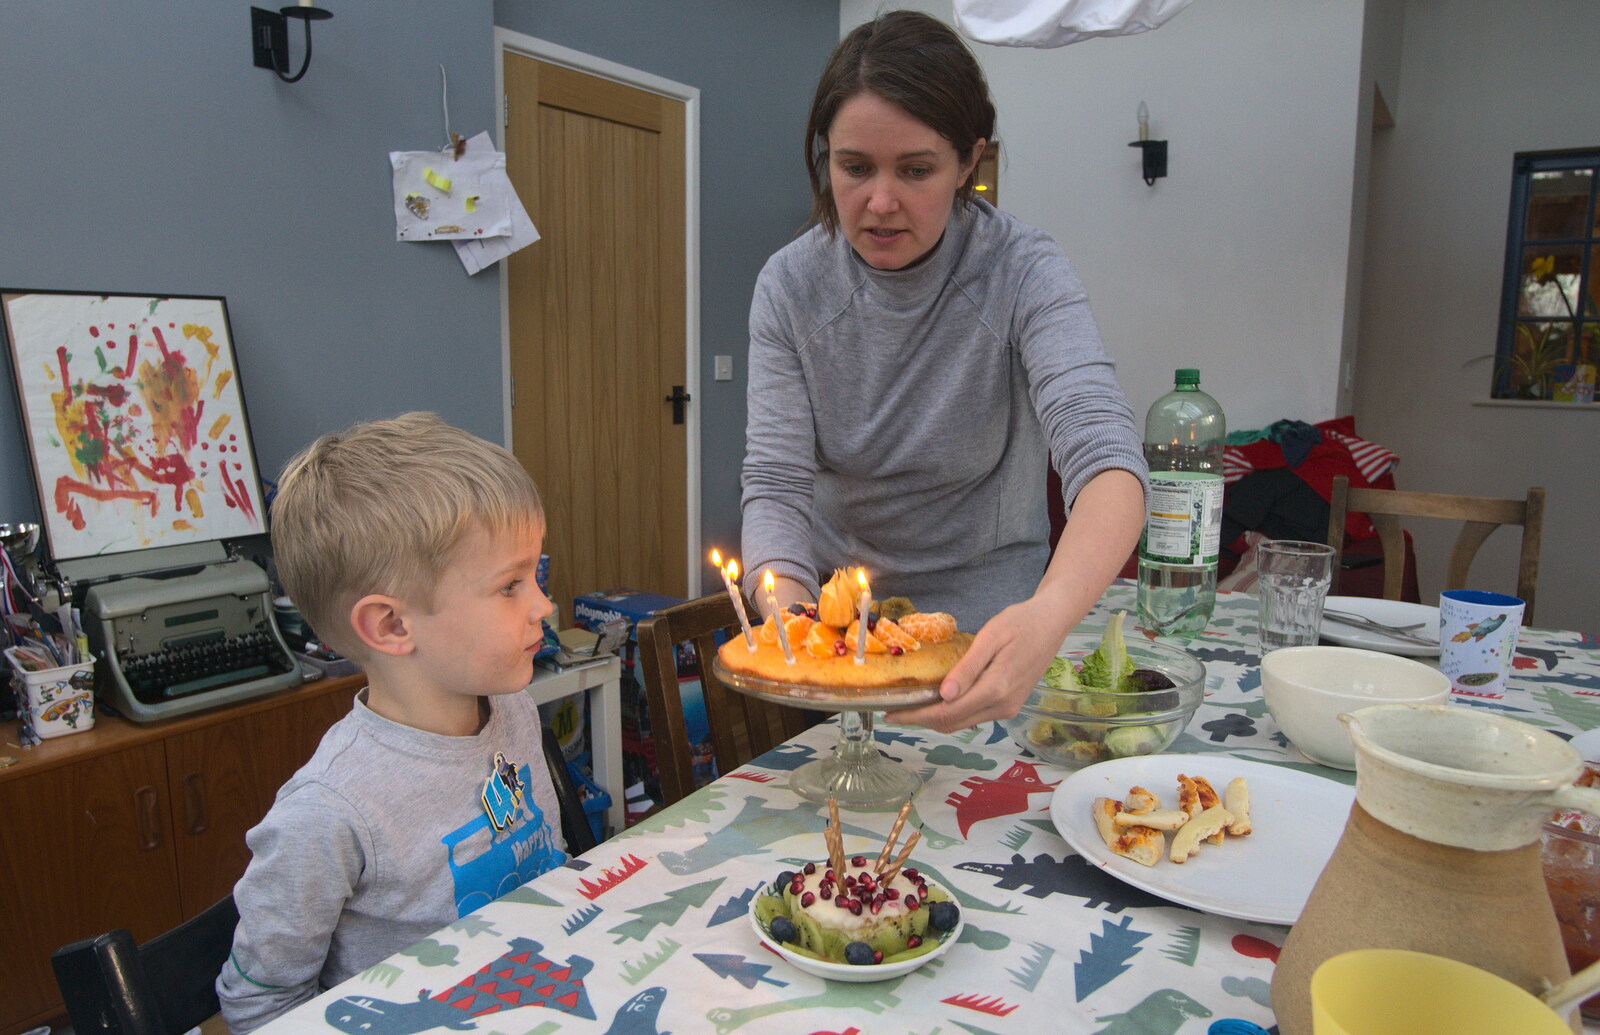 Harry gets a birthday cake from Harry's Birthday, Brome, Suffolk - 28th March 2016